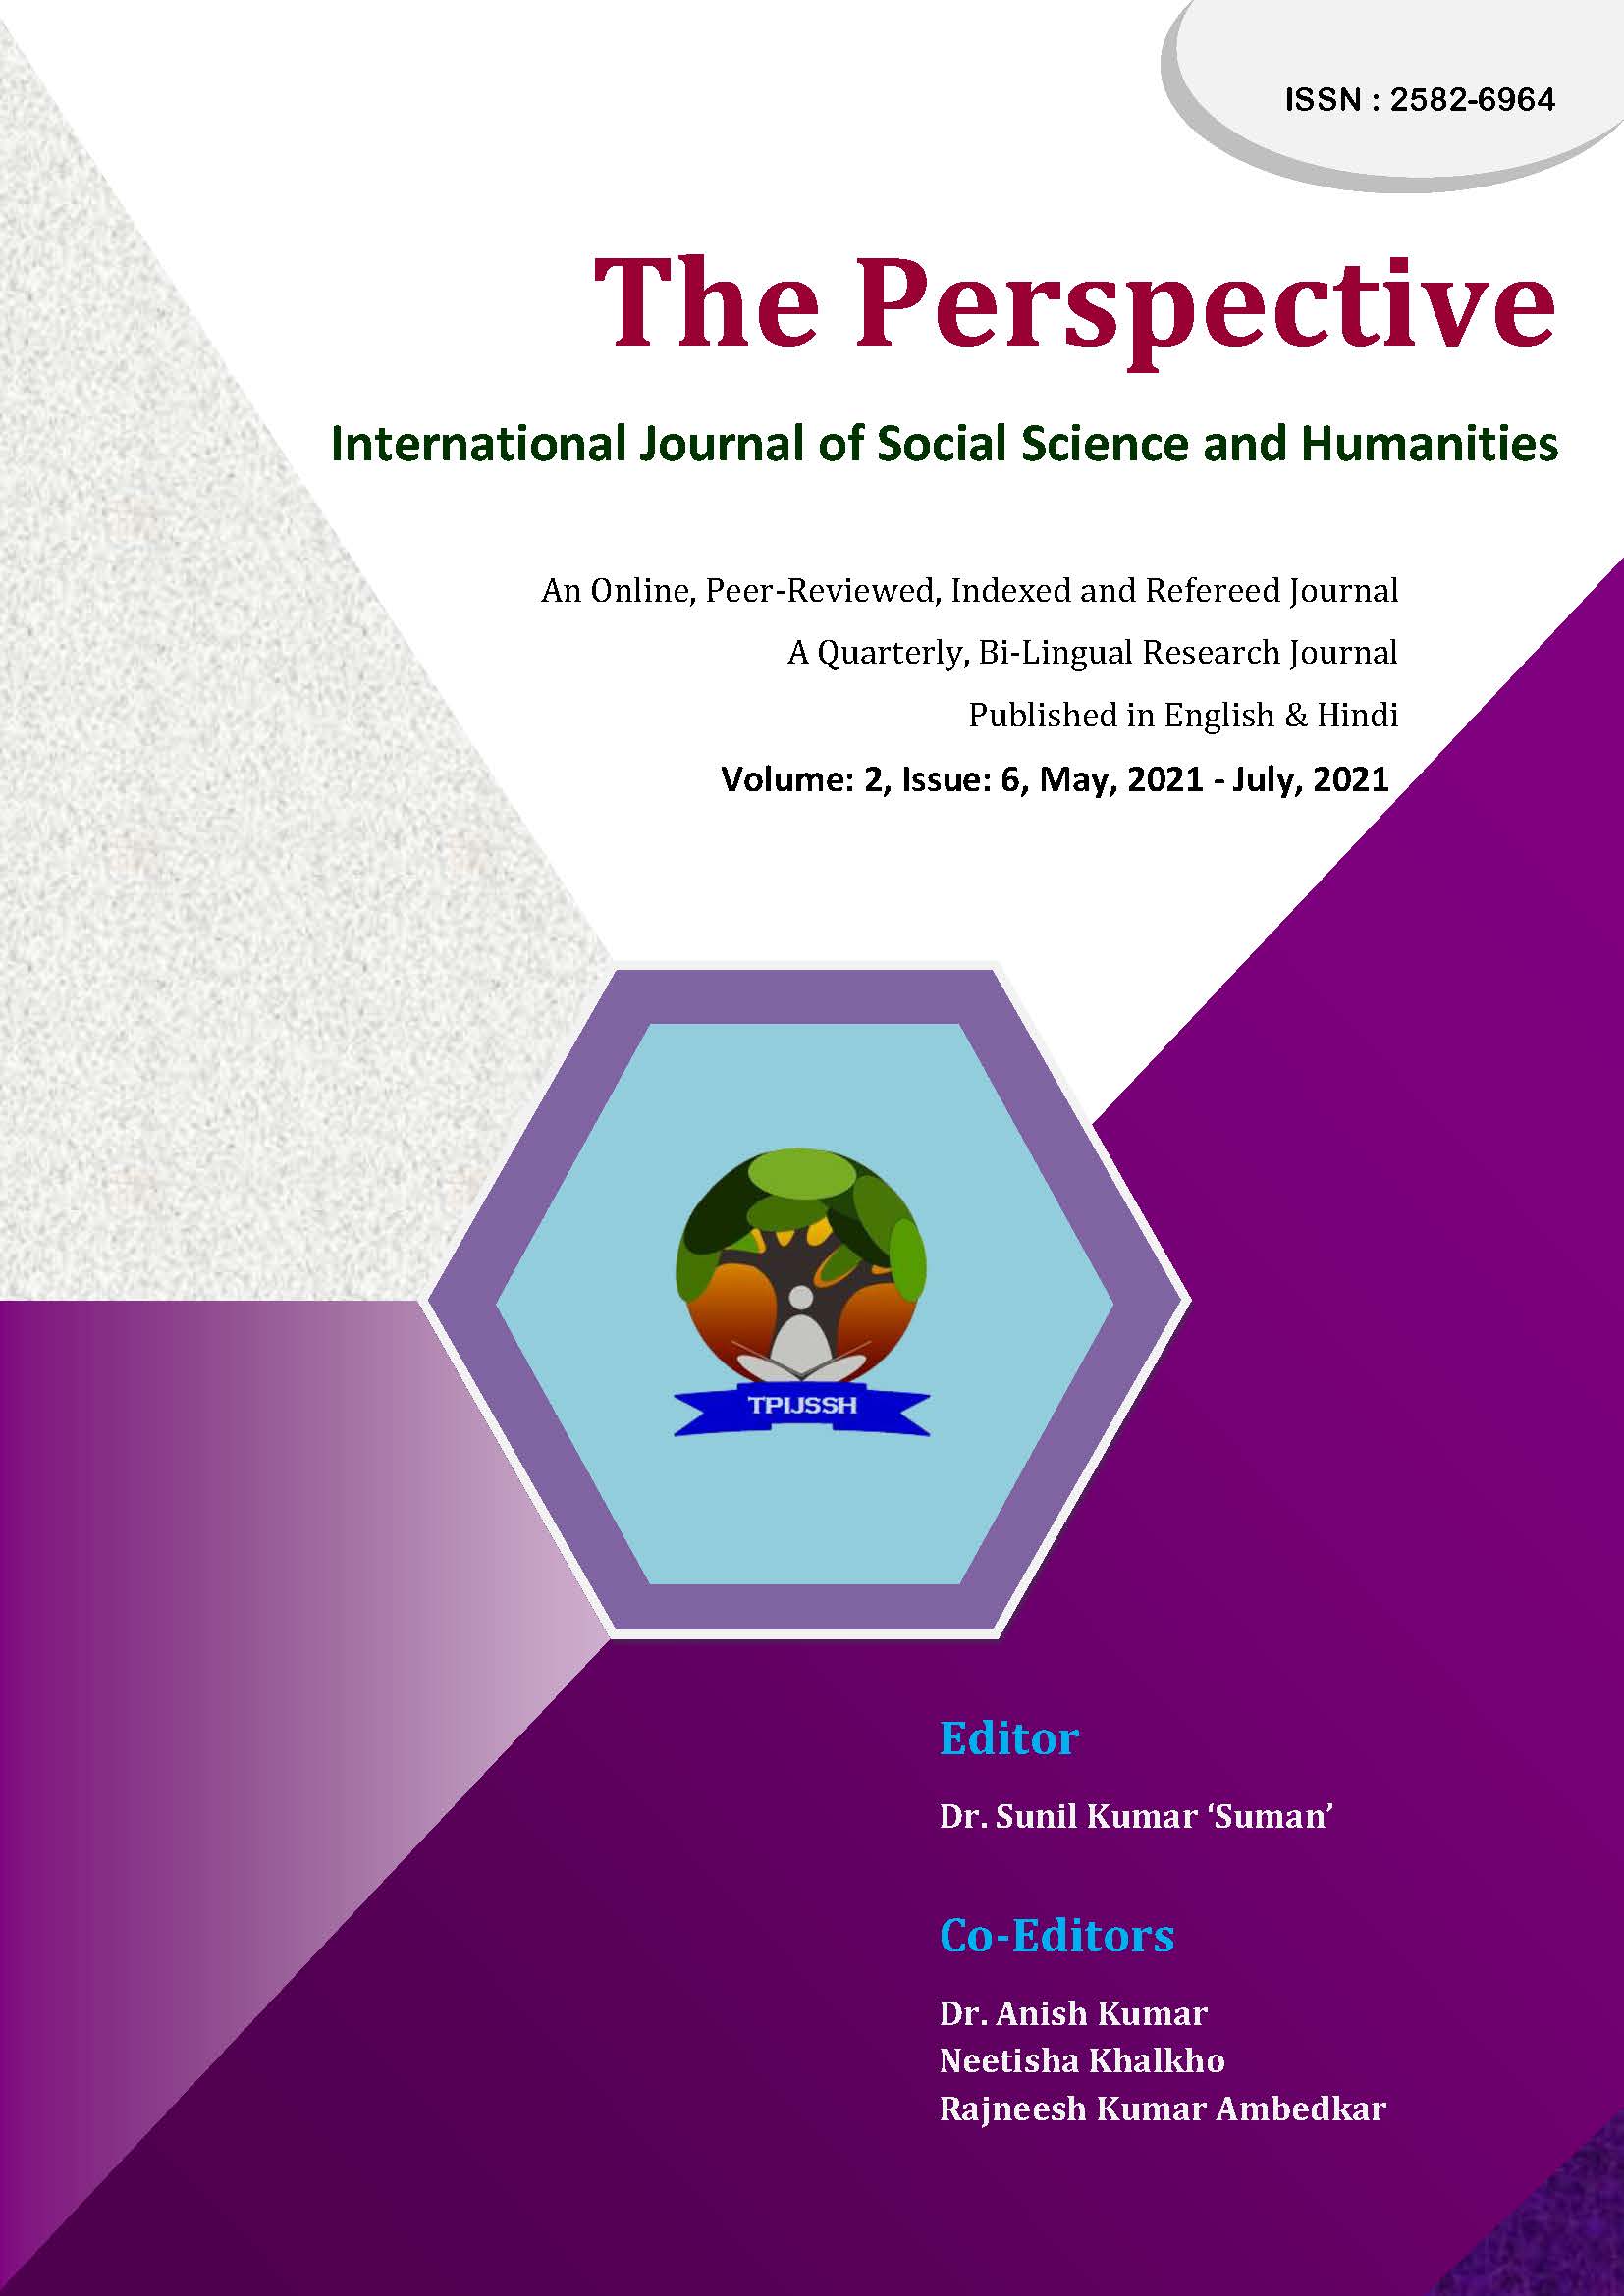 The Perspective International Journal of Social Science and Humanities Issue: 6